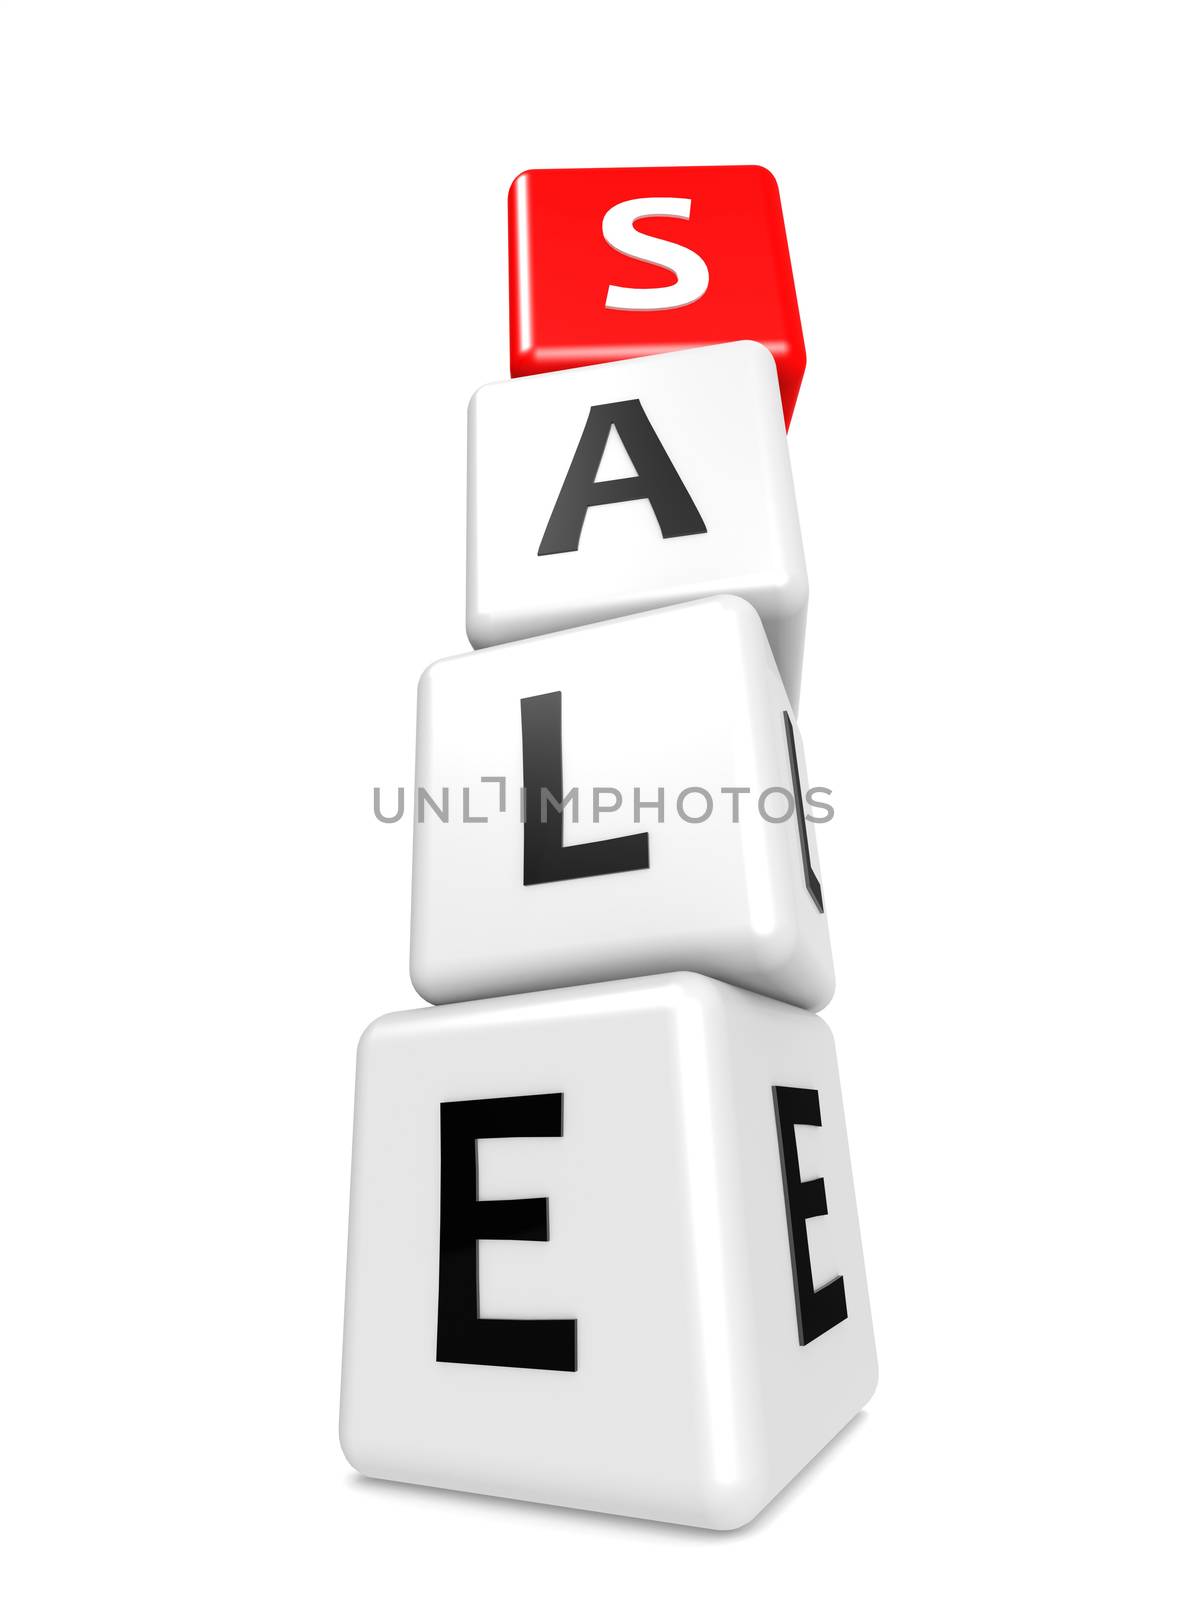 Buzzword sale image with hi-res rendered artwork that could be used for any graphic design.